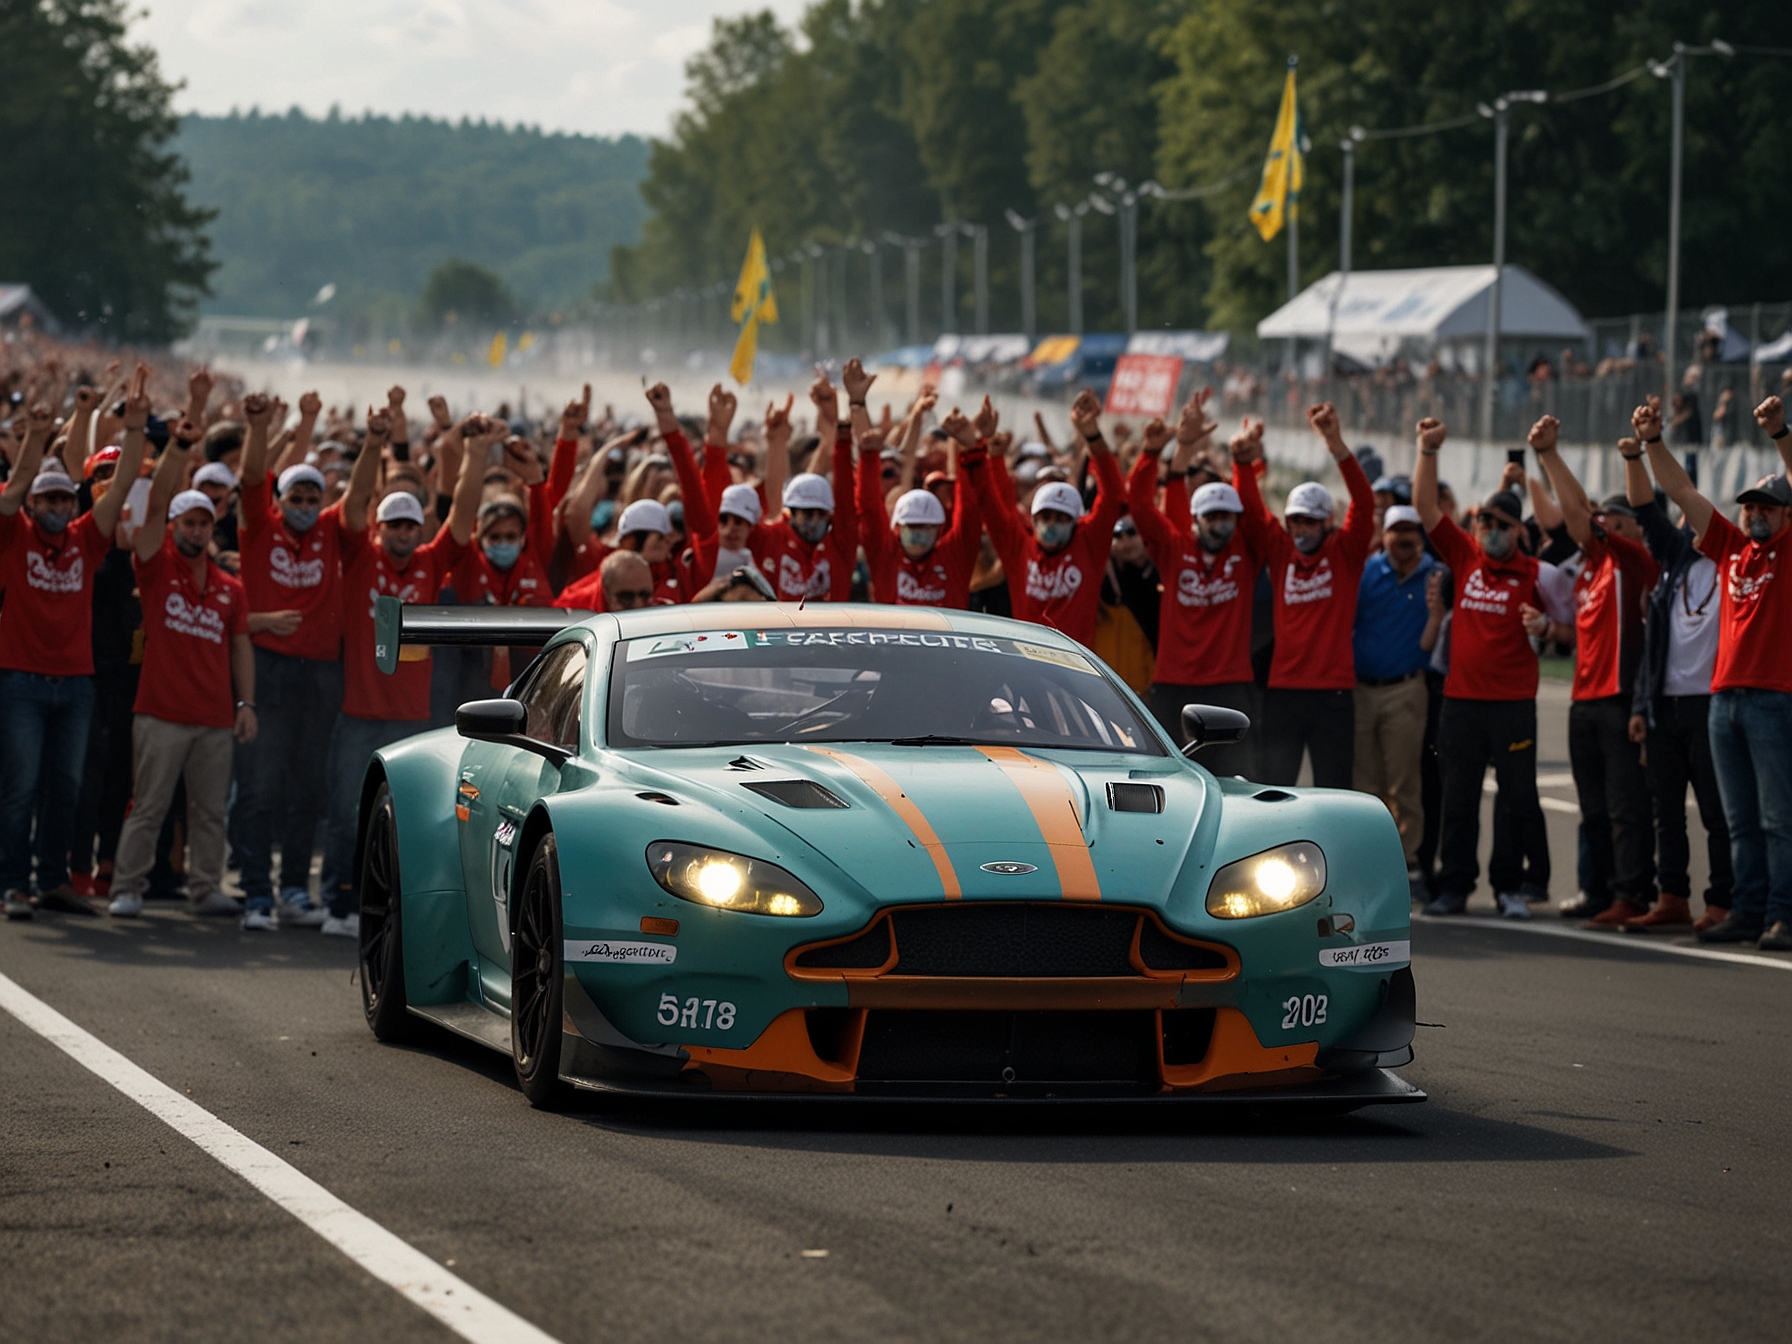 The Comtoyou Racing team celebrates a historic victory at the Spa 24 Hours, with drivers Nicki Thiim, Marco Sorensen, and Mattia Drudi triumphant, their Aston Martin Vantage GT3 displayed prominently.